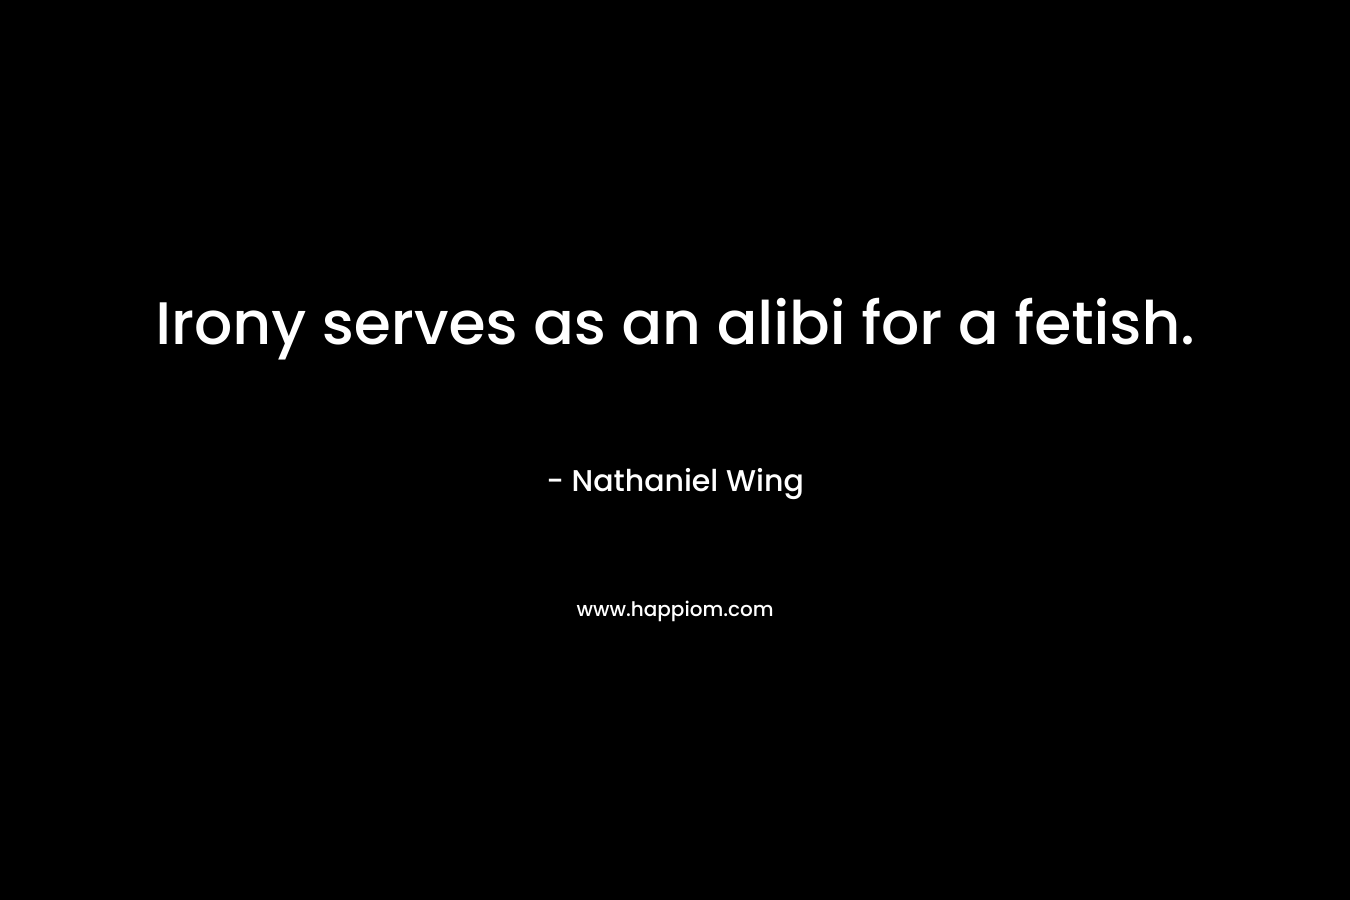 Irony serves as an alibi for a fetish. – Nathaniel Wing